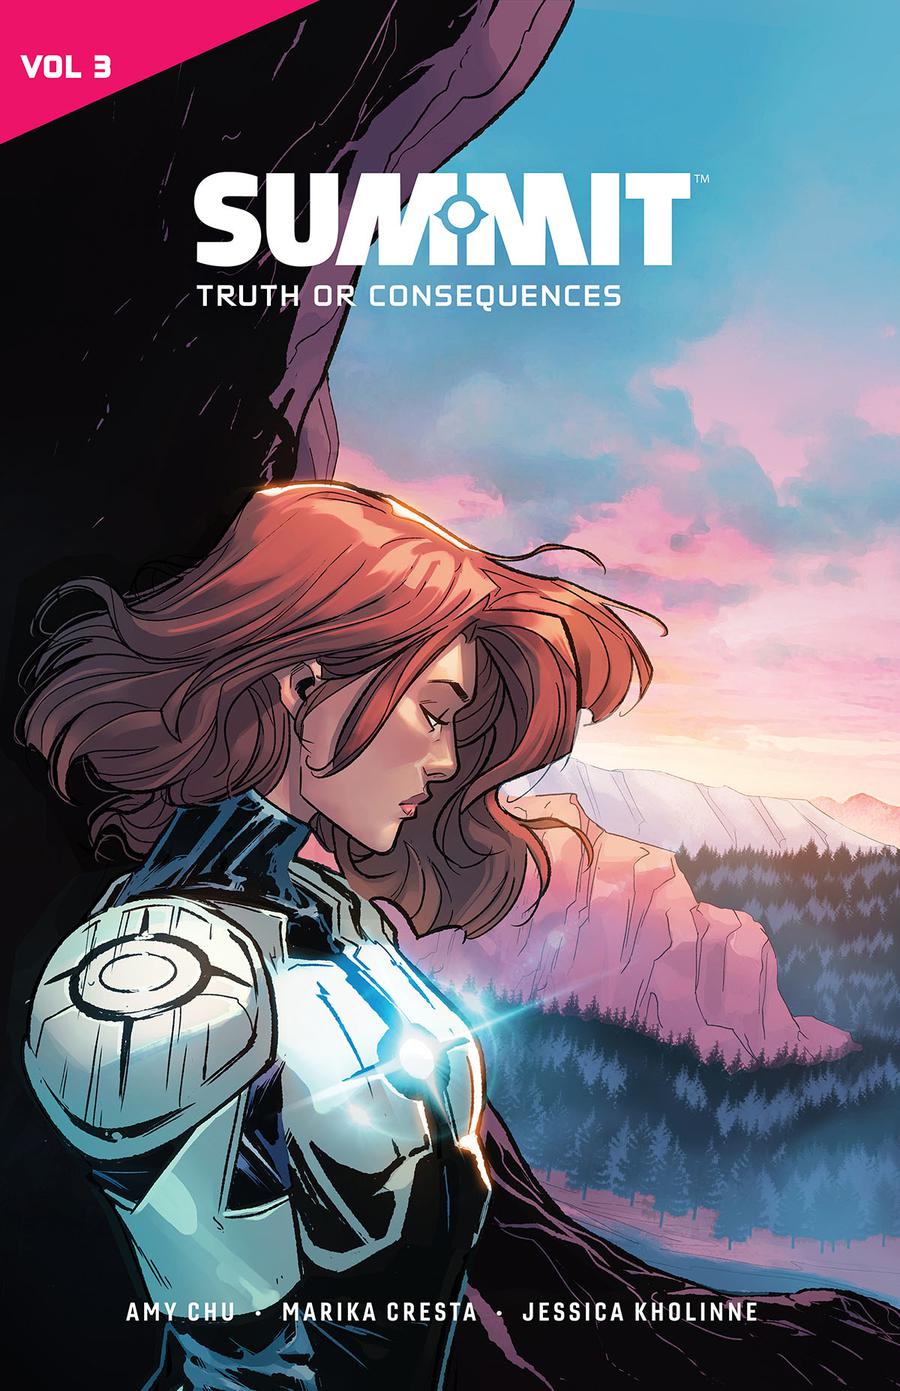 Catalyst Prime Summit Vol 3 Truth Or Consequences TP